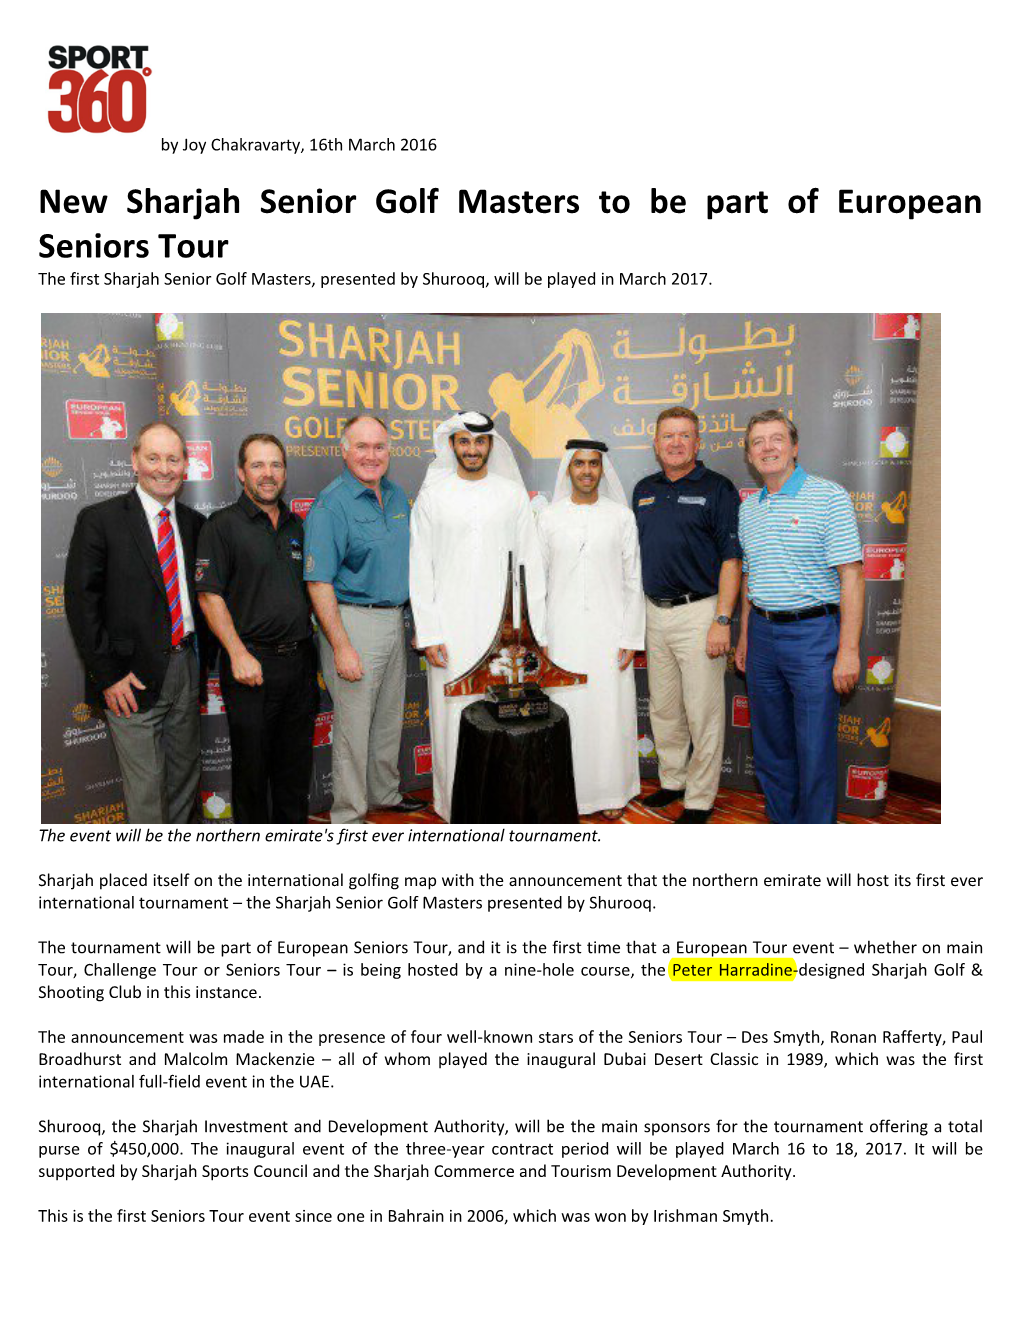 New Sharjah Senior Golf Masters to Be Part of European Seniors Tour the First Sharjah Senior Golf Masters, Presented by Shurooq, Will Be Played in March 2017